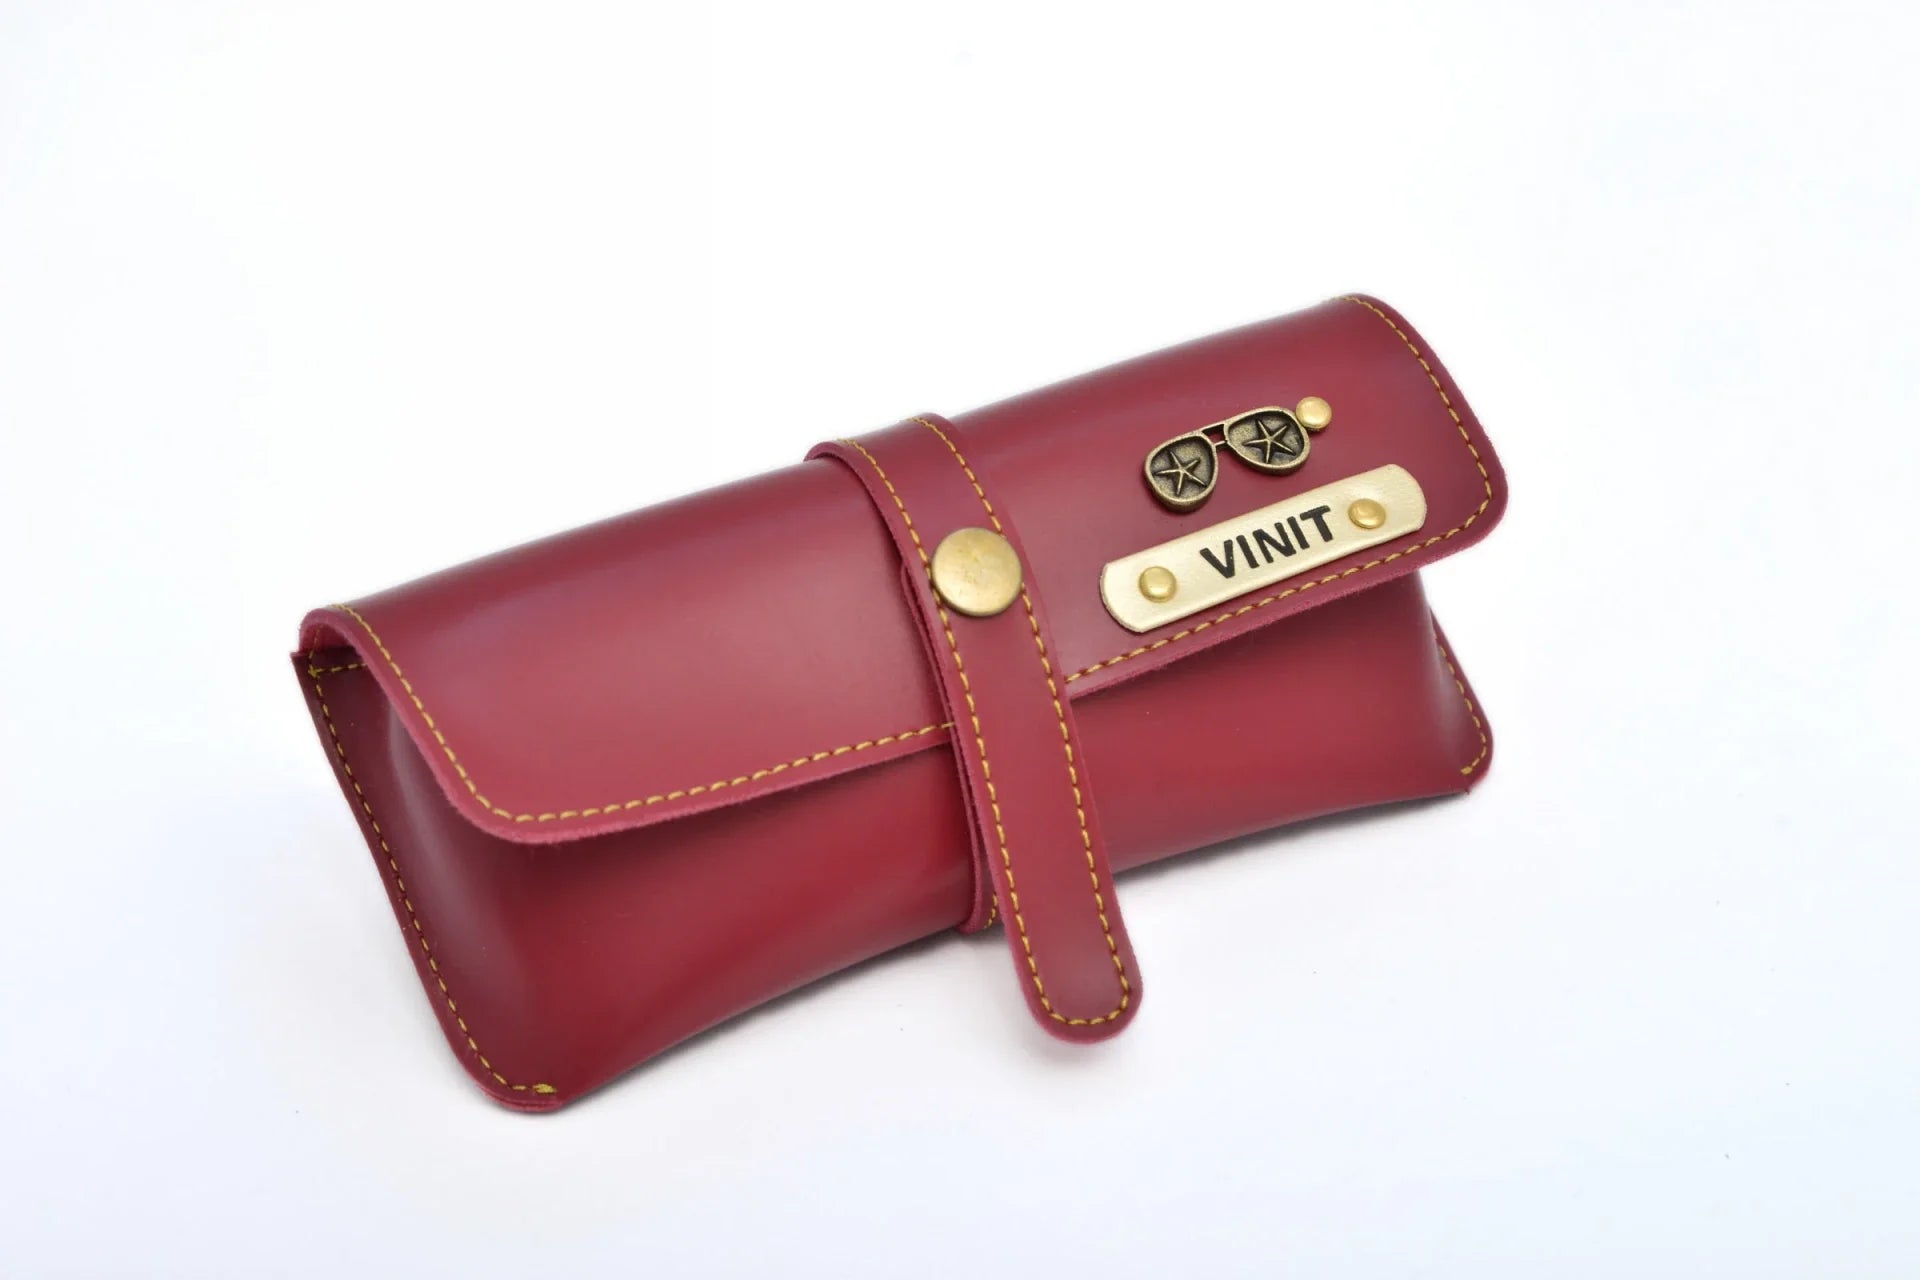 Add your name and charm to the eyewear case and flaunt its classy leather, sturdy build and flawless finish